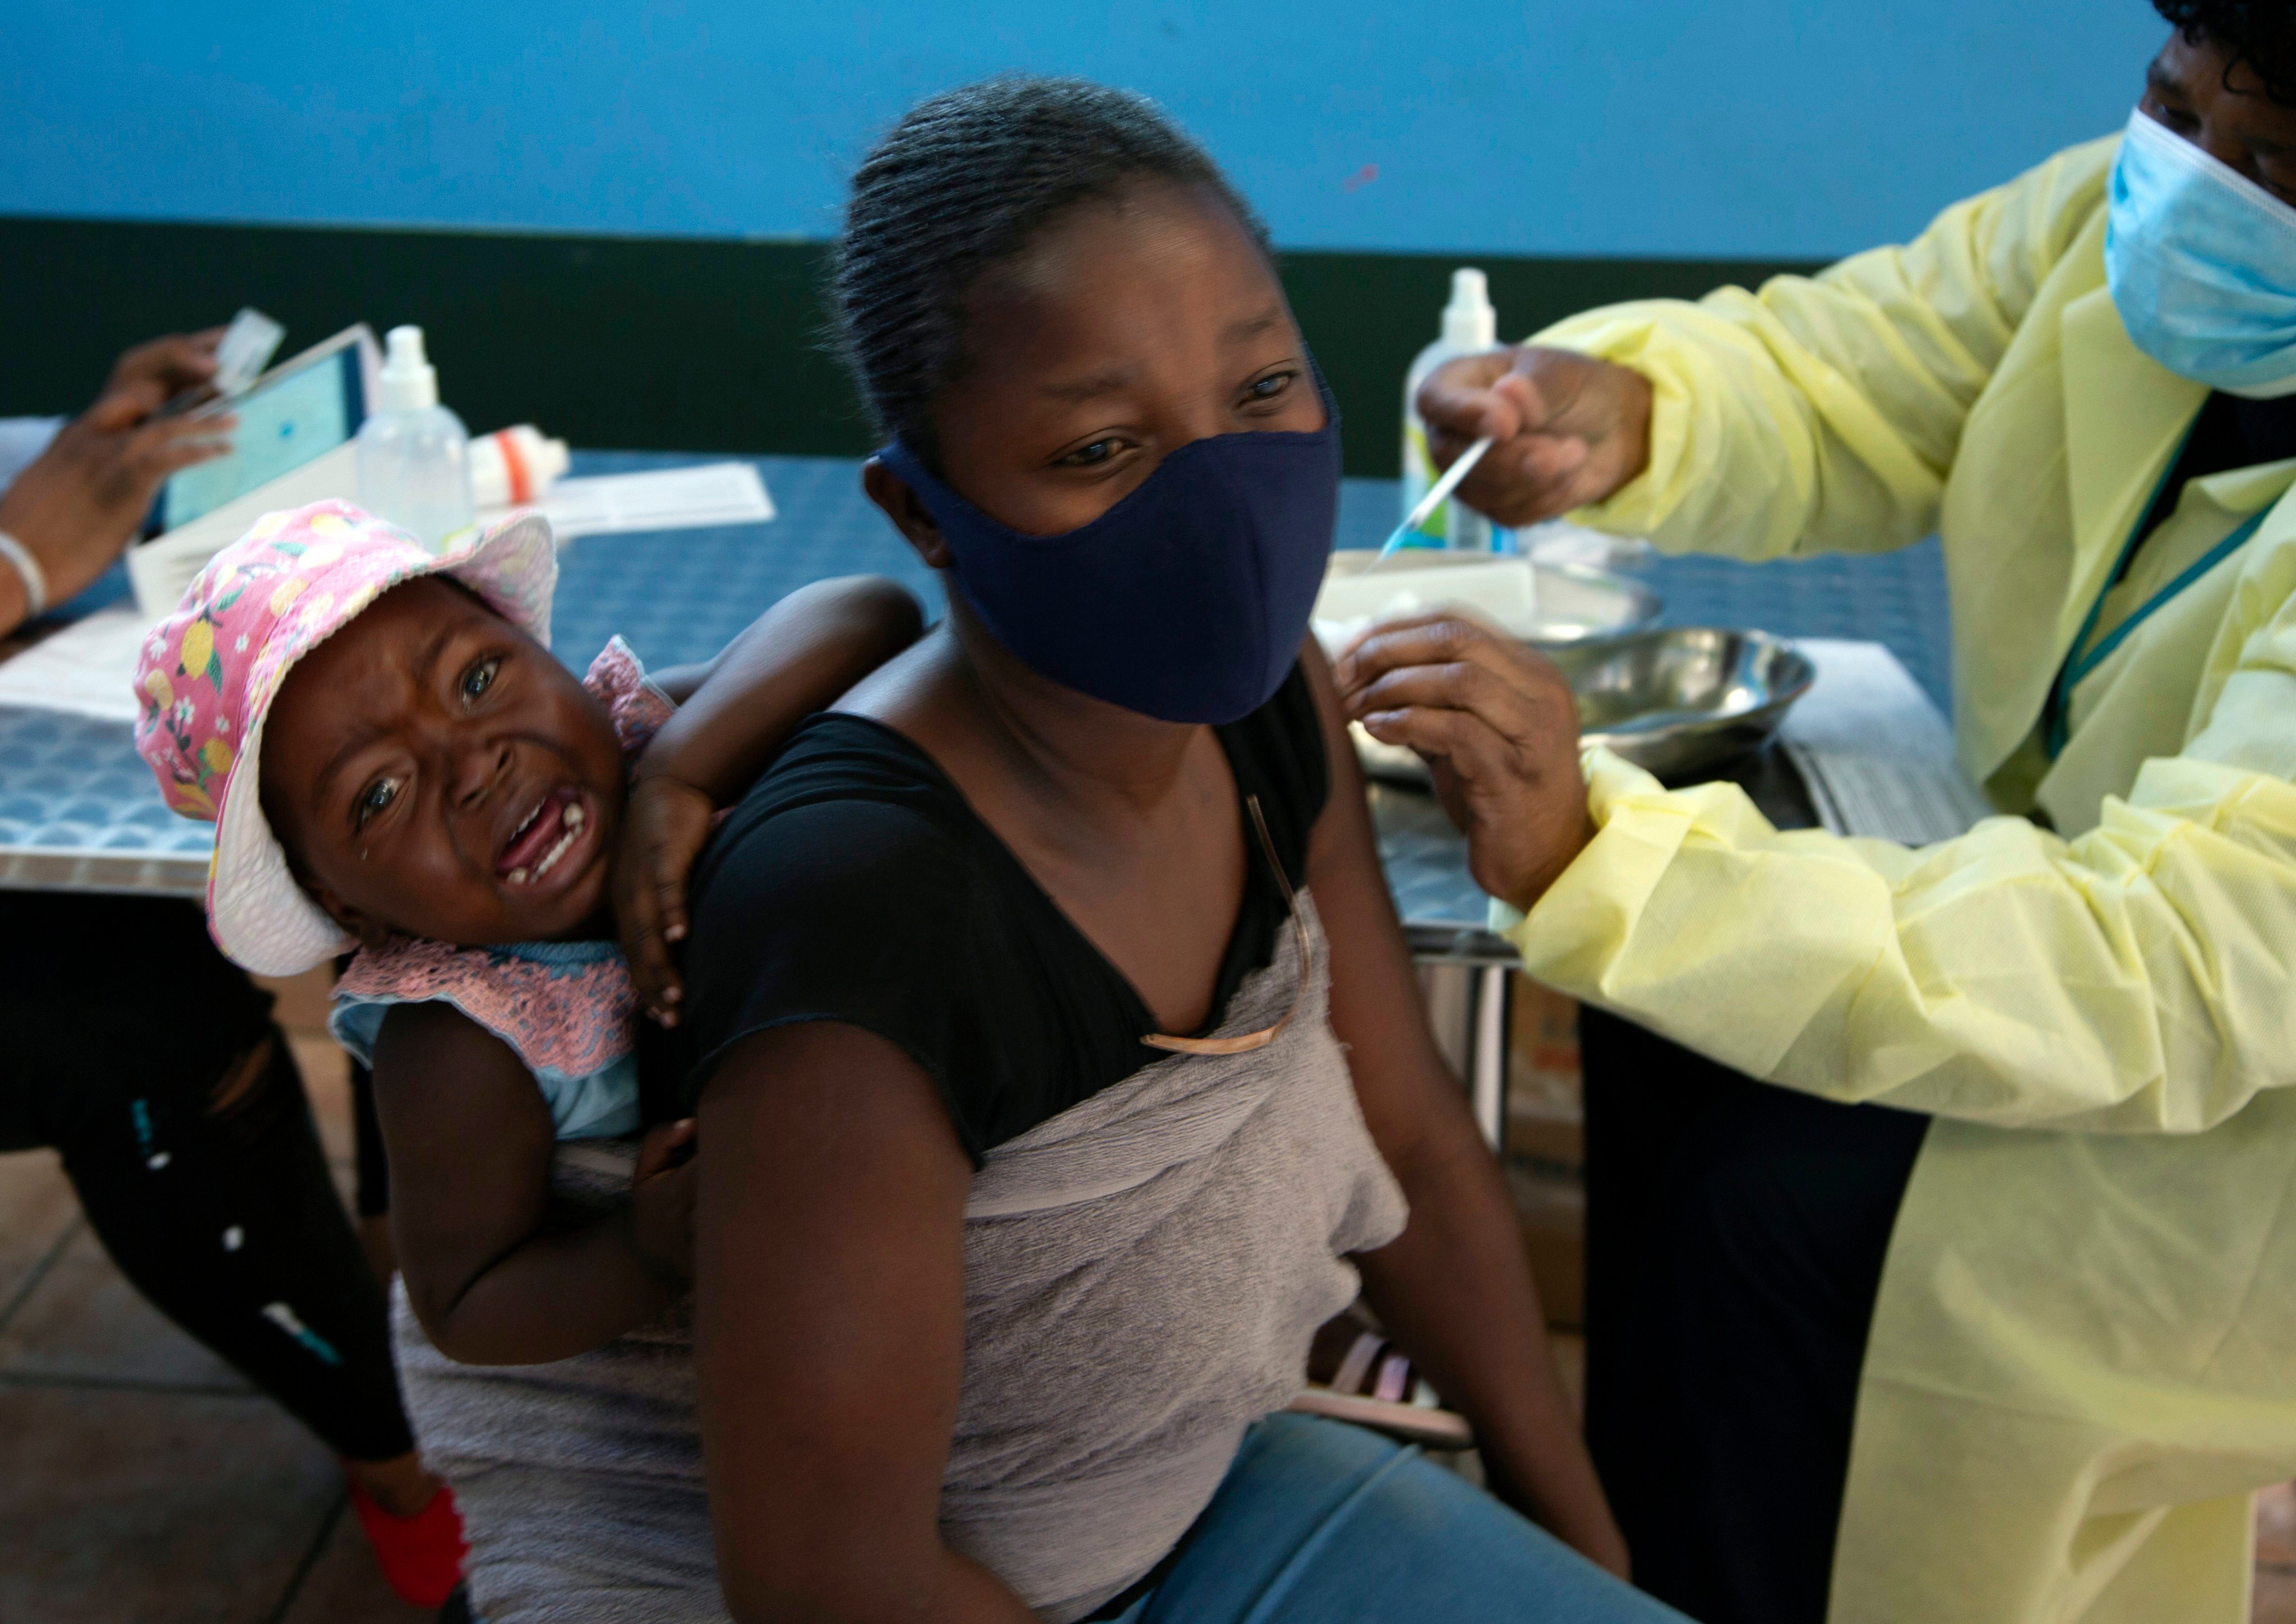 A baby cries as her mother receives a Covid-19 vaccine in a township near Johannesburg, South Africa, on October 21, 2021. Photo: AP